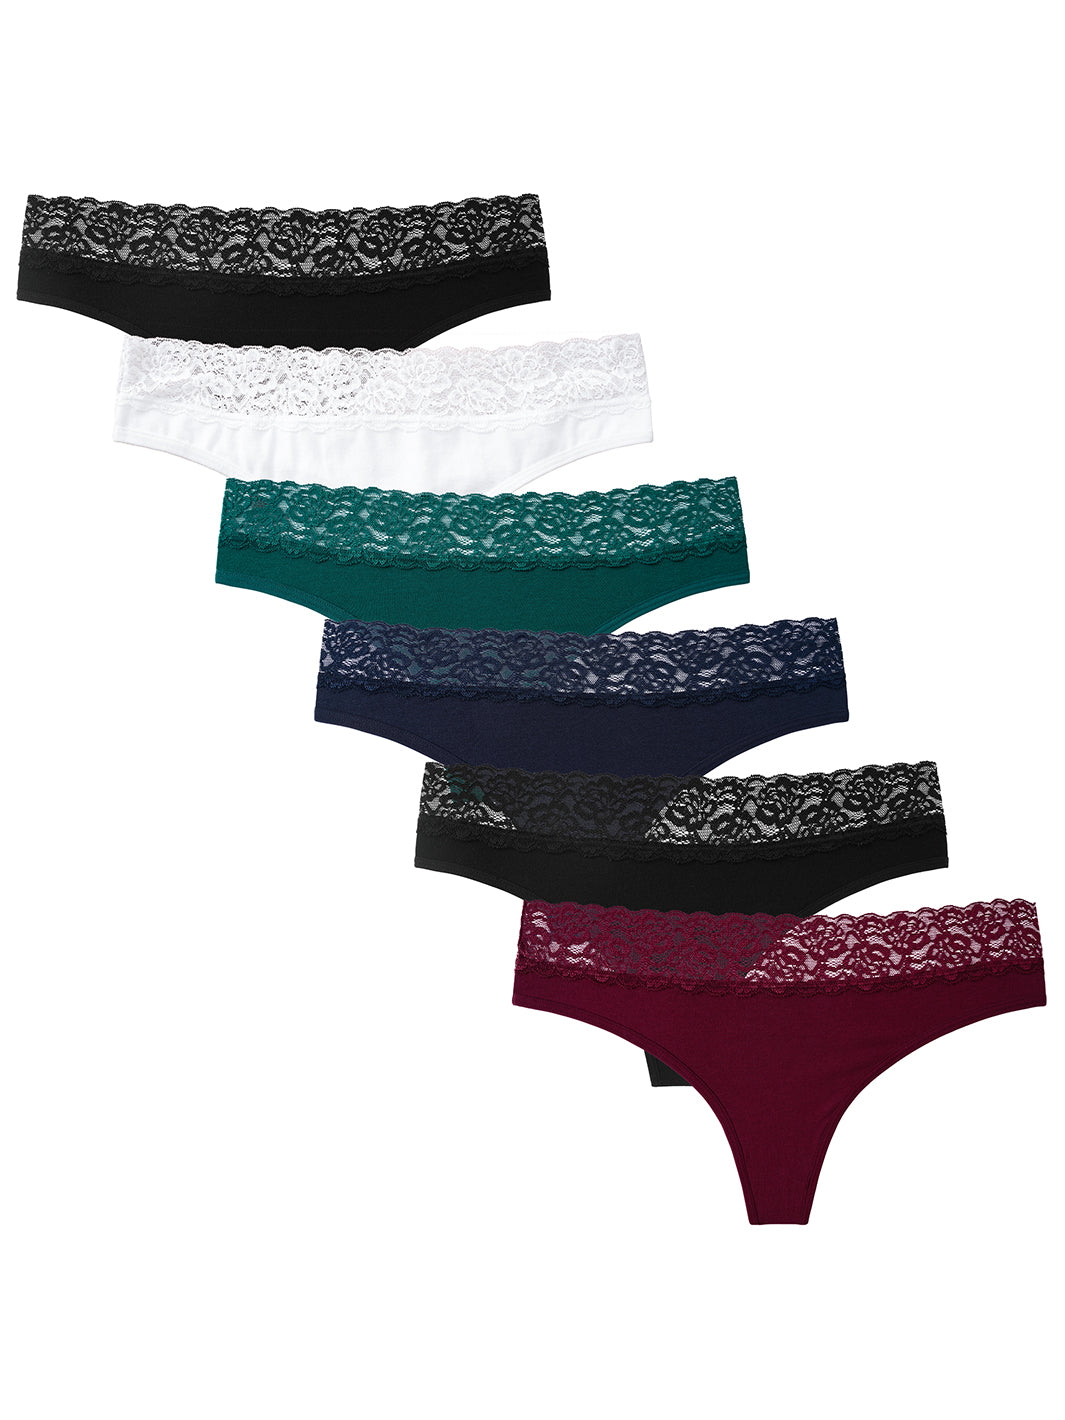 INNERSY Womens Underwear Cotton Hipster Panties Low Rise Basics Underwear  Pack of 6 (X-Small, Brights)